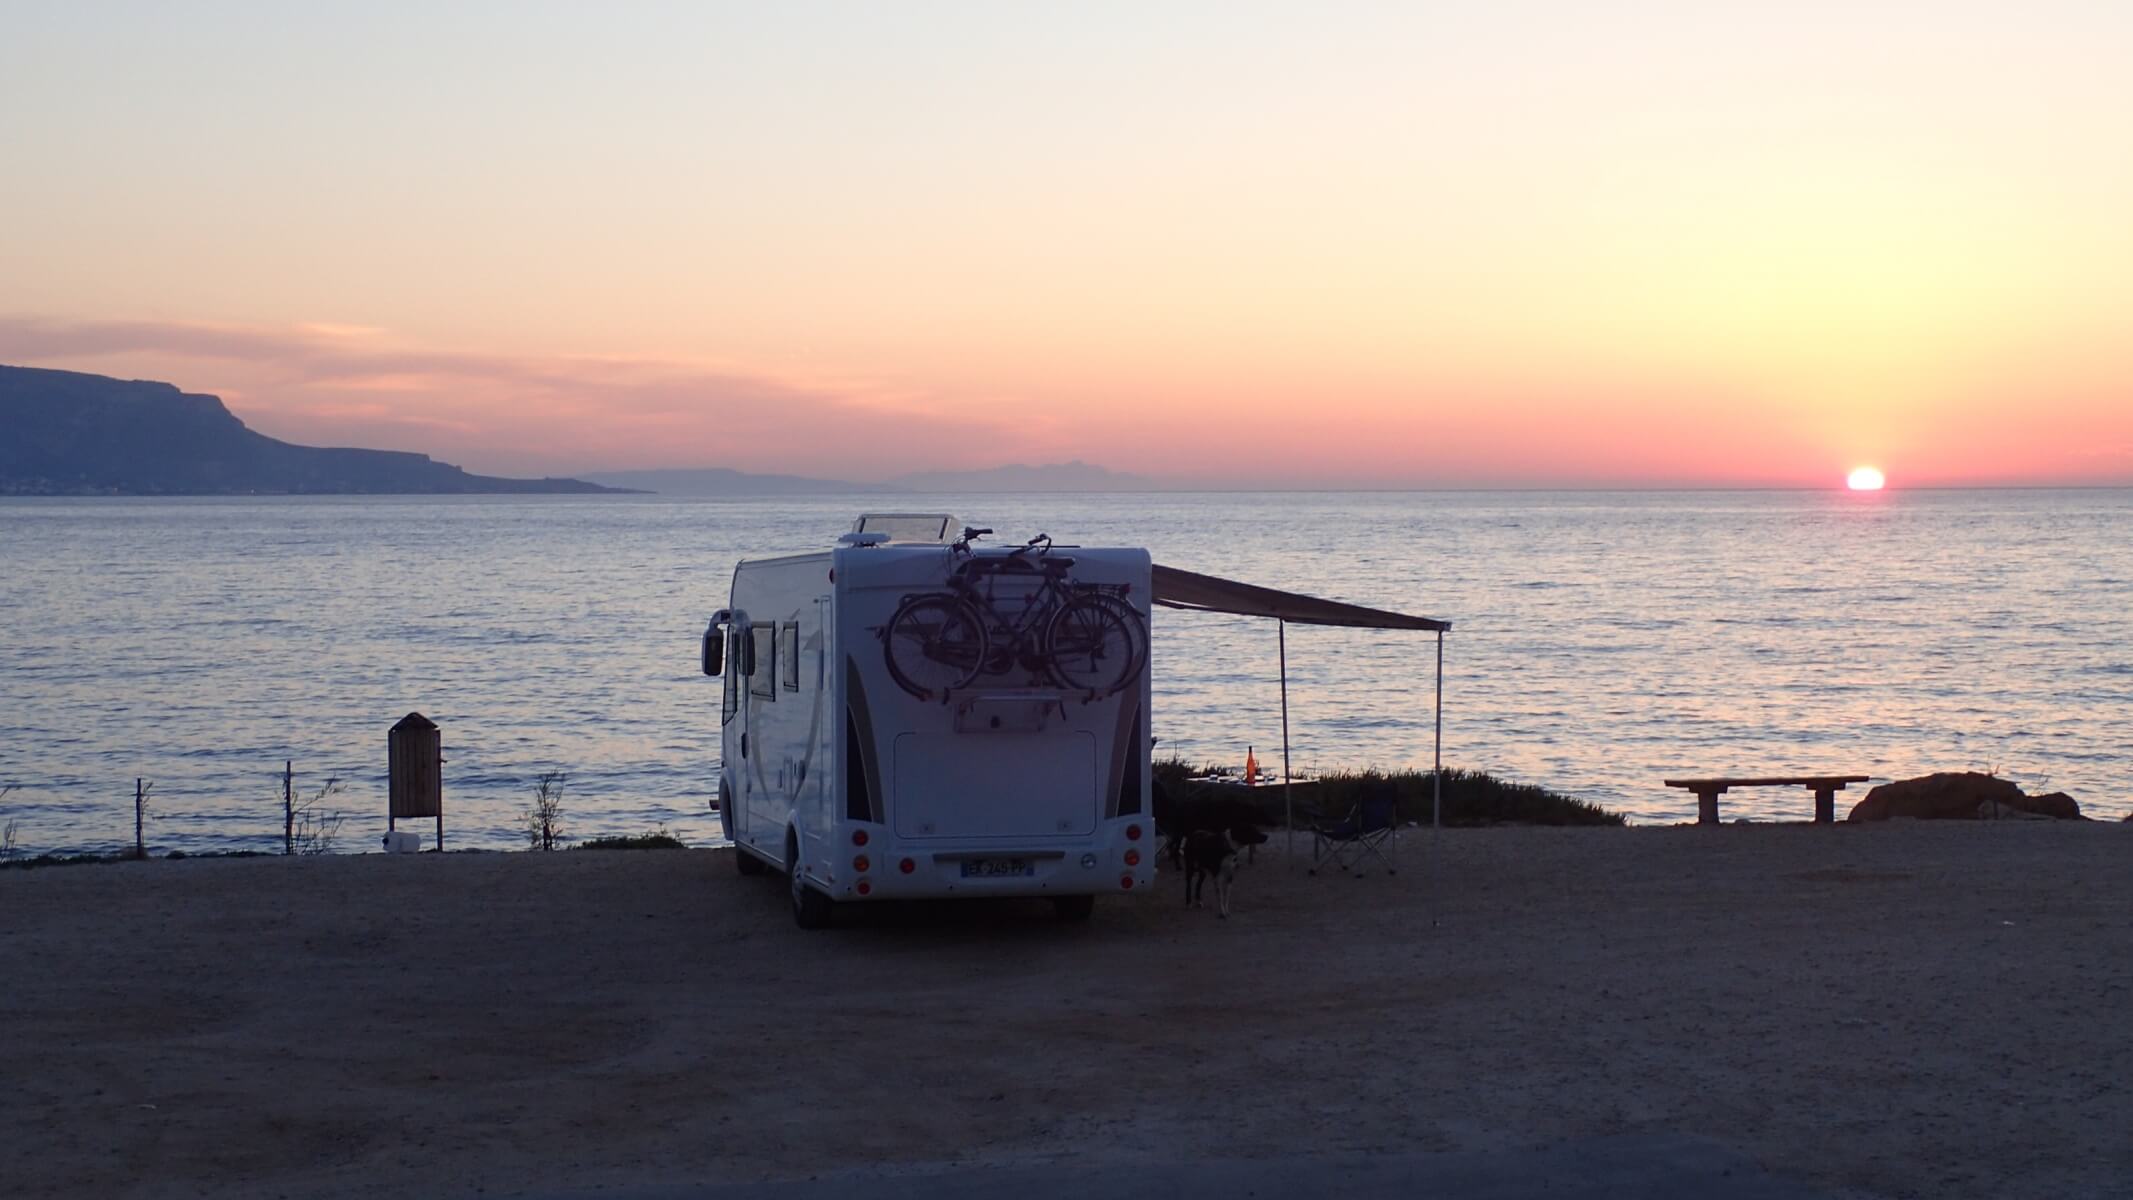 Holidays by the sea with a motorhome